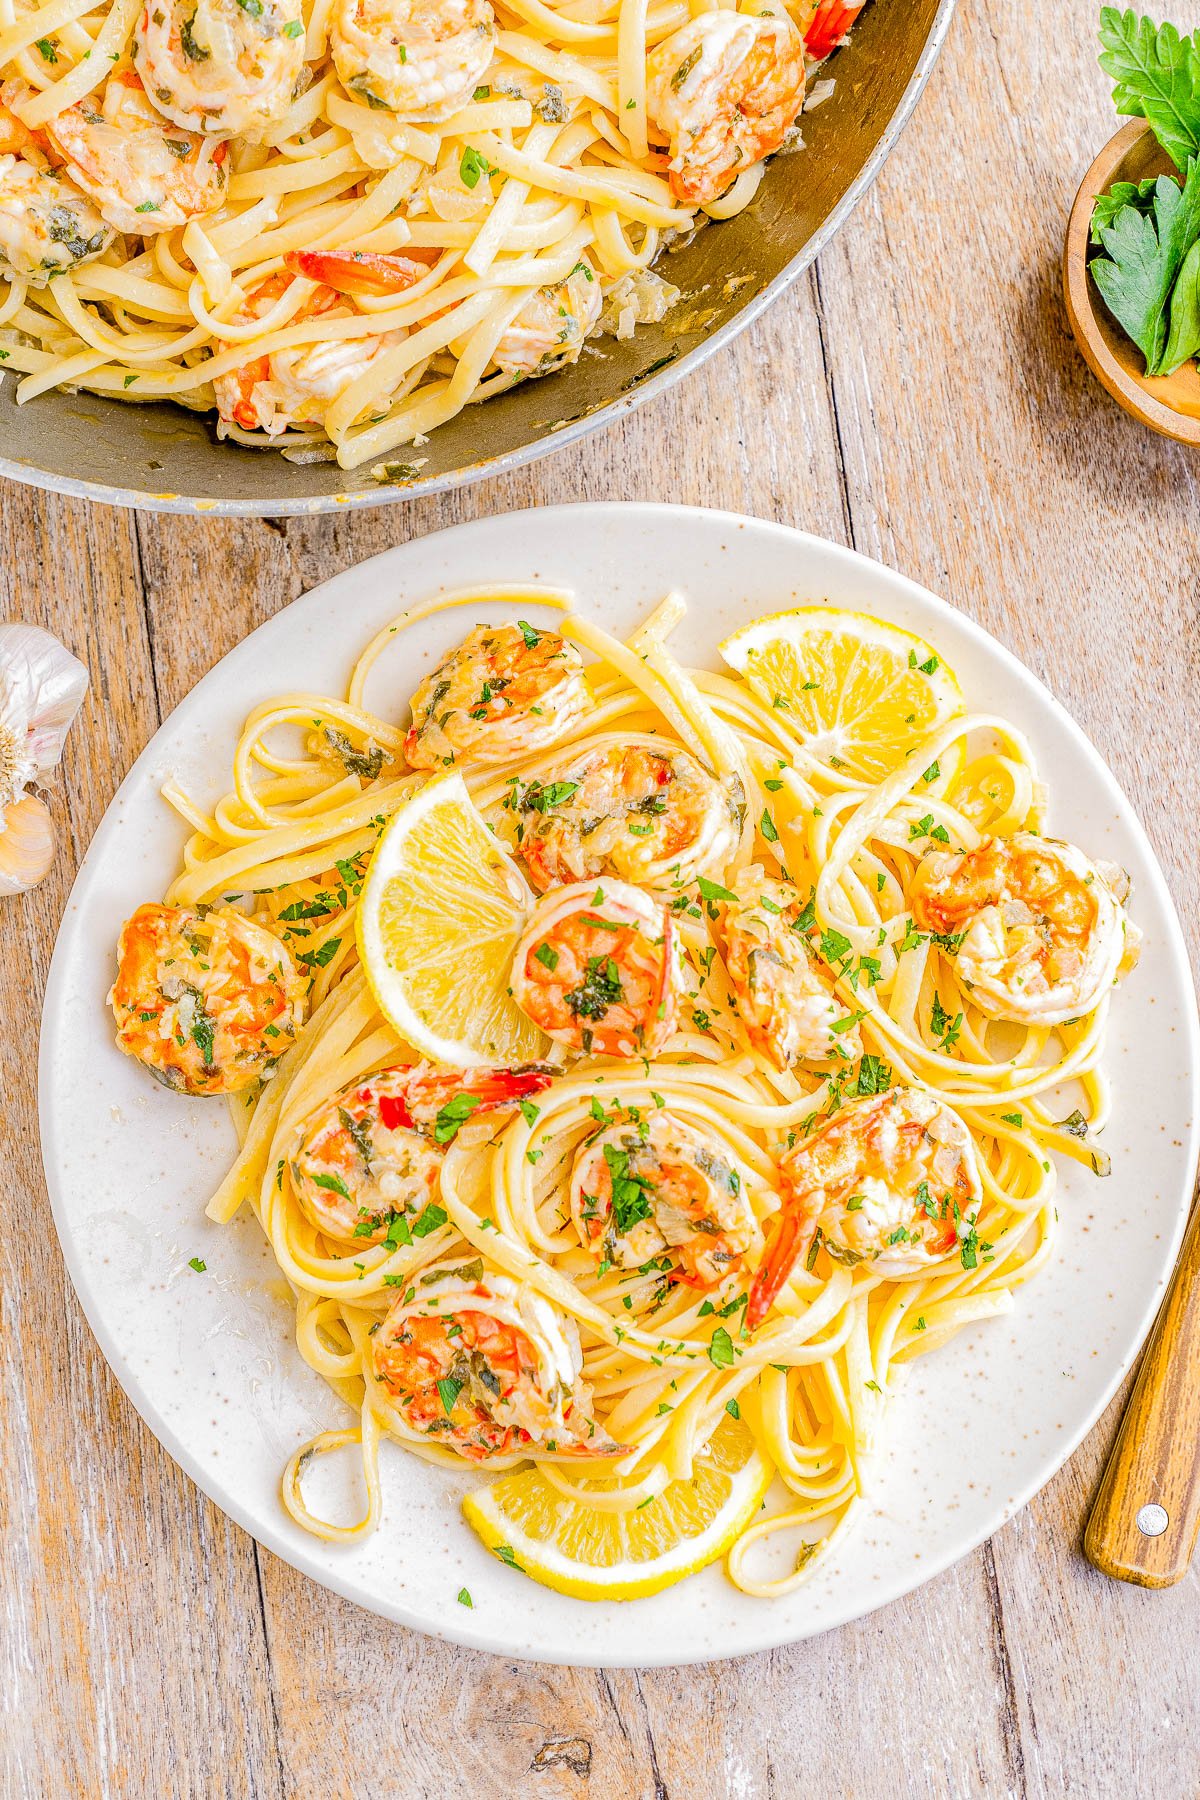 Shrimp Scampi Pasta - Indulge your taste buds with this elegant yet simple Italian-inspired dish! Made with succulent shrimp, zesty lemon, savory parmesan cheese, and al dente cooked pasta, this EASY restaurant-worthy recipe is ready in 15 minutes! PERFECT when you want to impress your guests but don't want to spend all day cooking! Save this one for not only an easy weeknight family dinner, but also for special occasions including holiday dinners, birthdays, anniversaries, or a date-night-in.